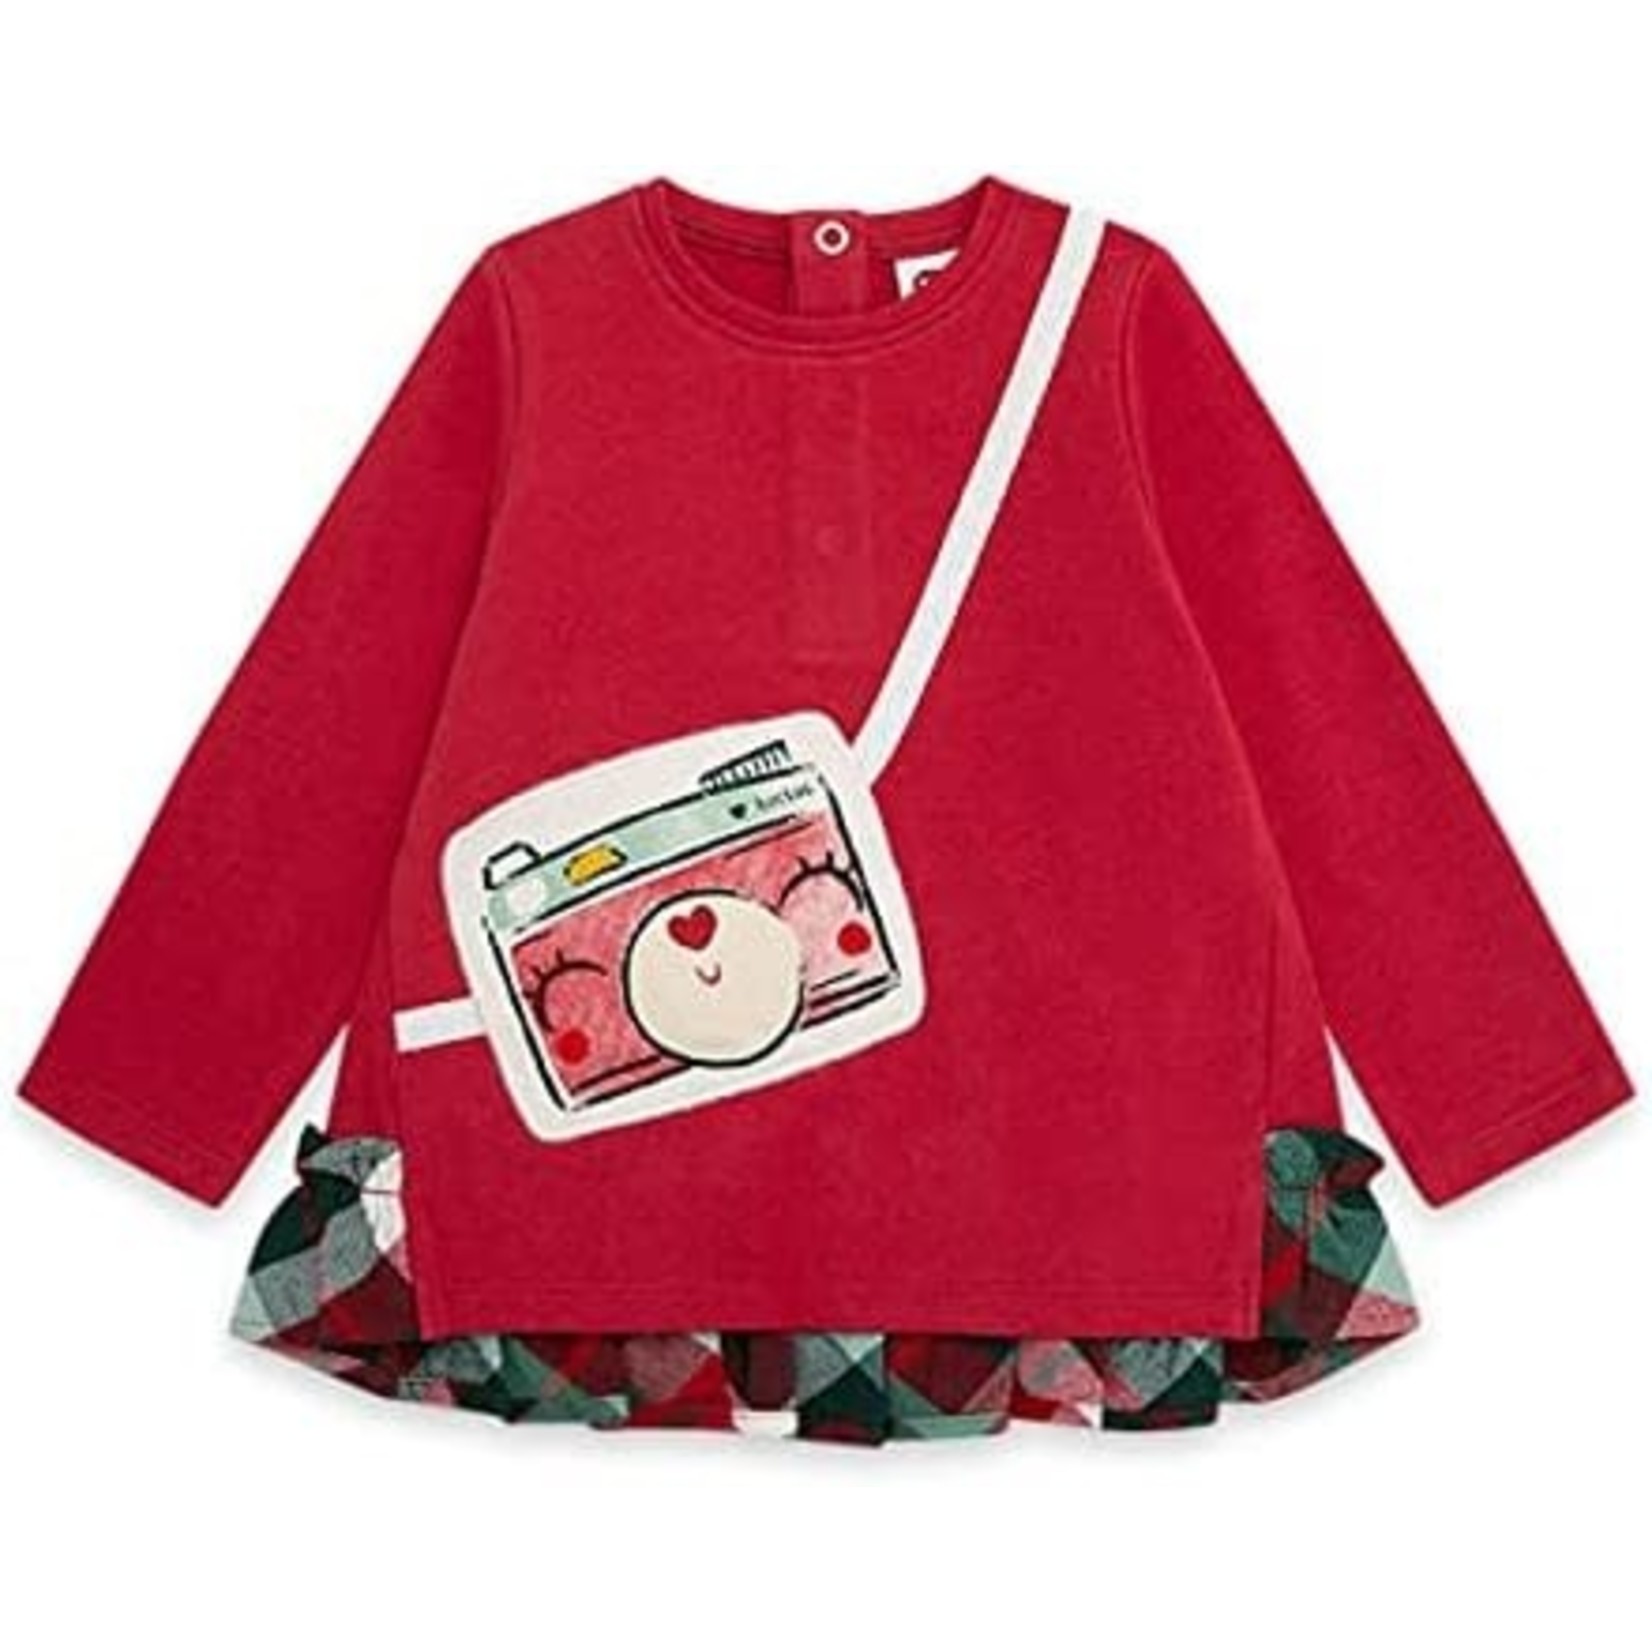 TucTuc TUC TUC - Longsleeve red t-shirt with plaid frills - size 6 years